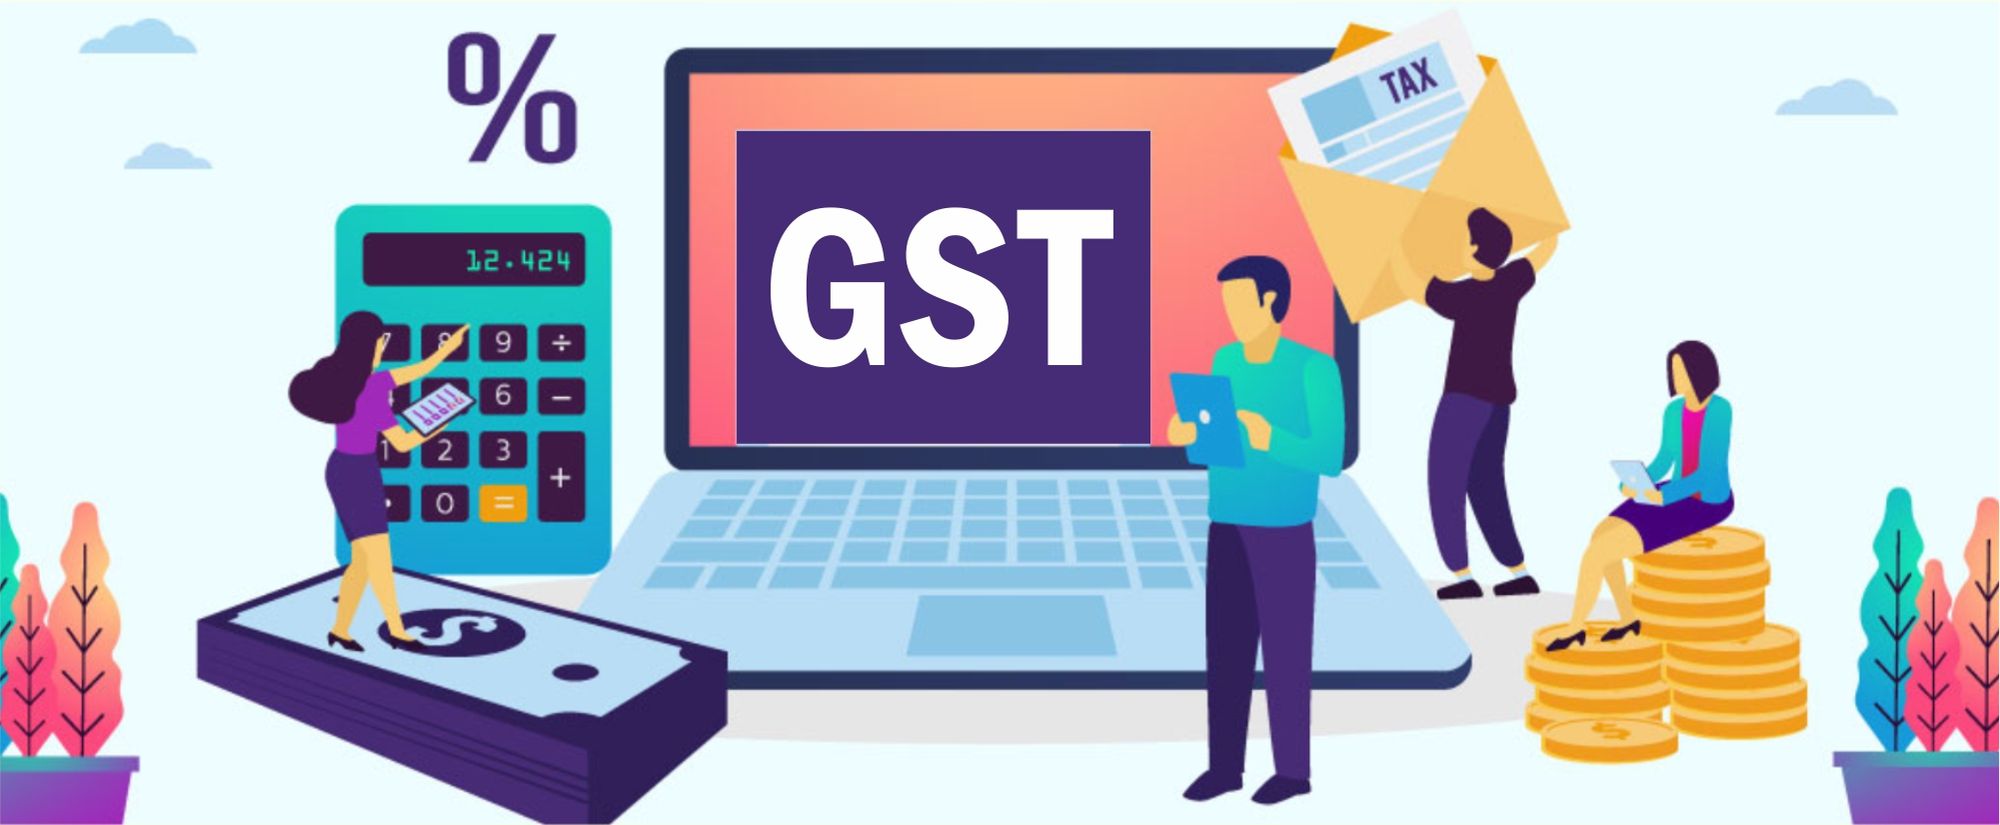 Benefits of GST In India